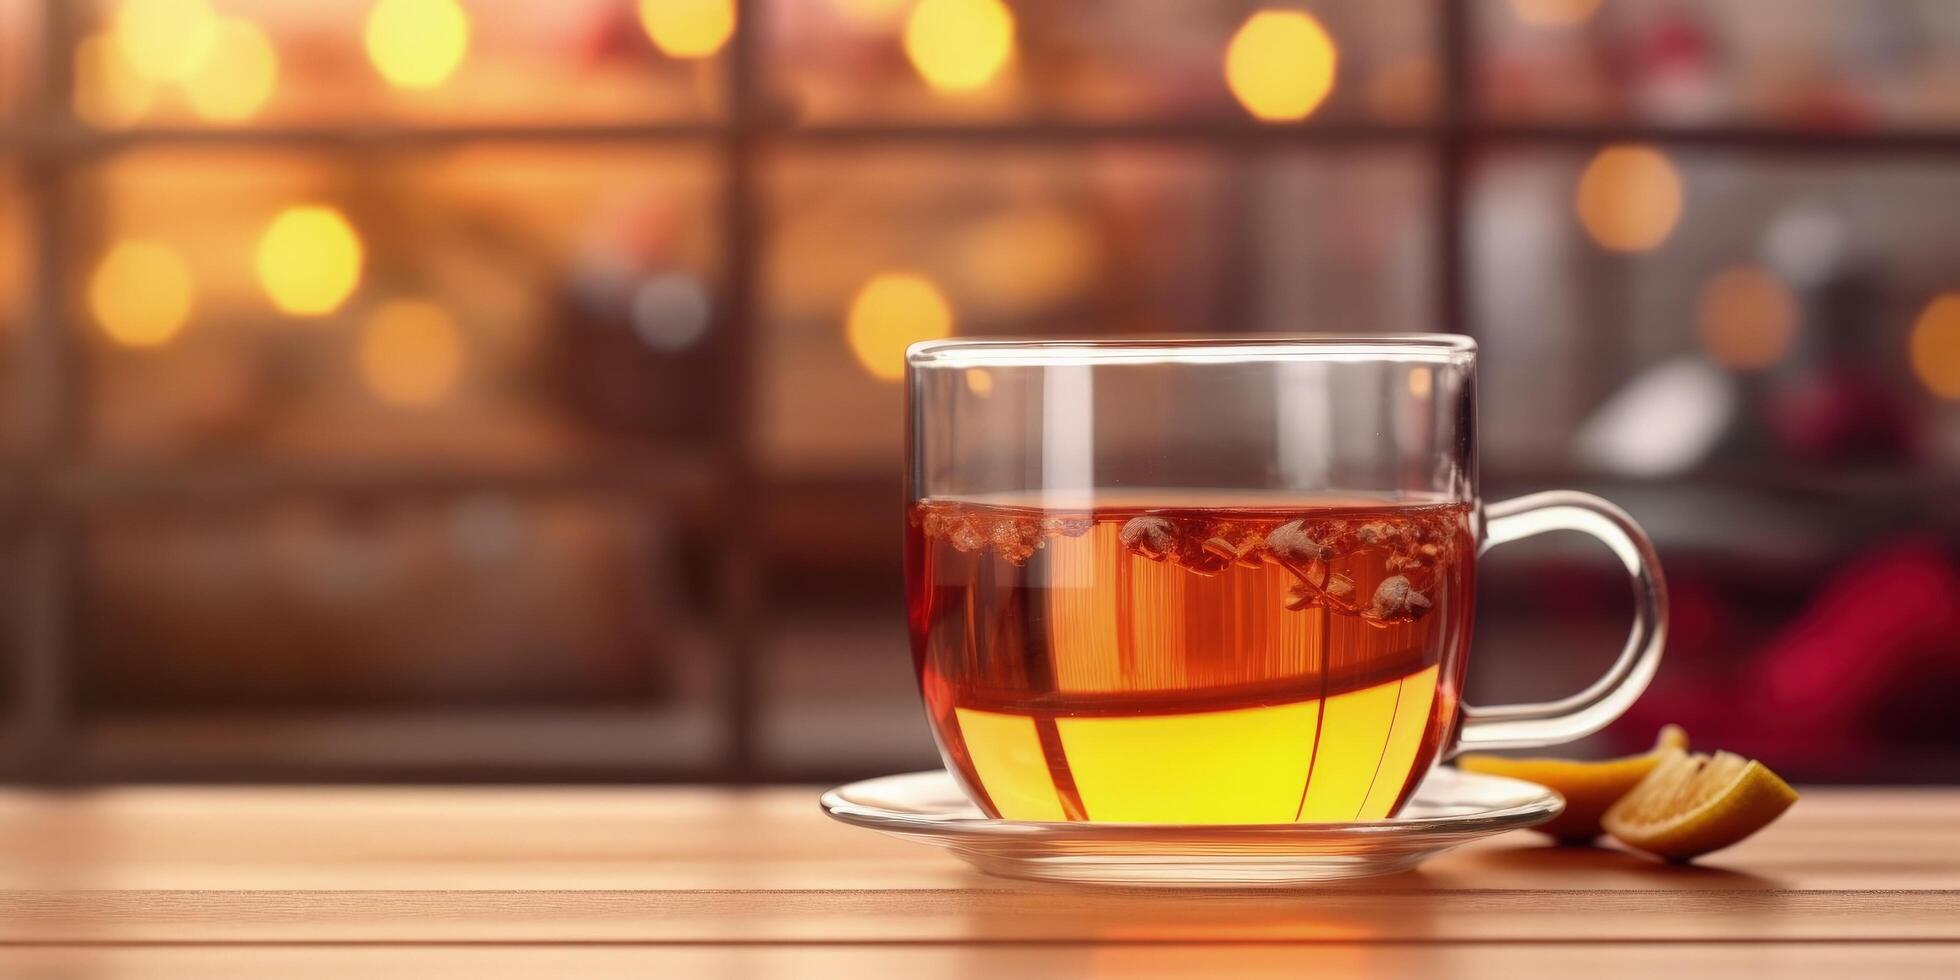 Glass cup of tea. Illustration photo